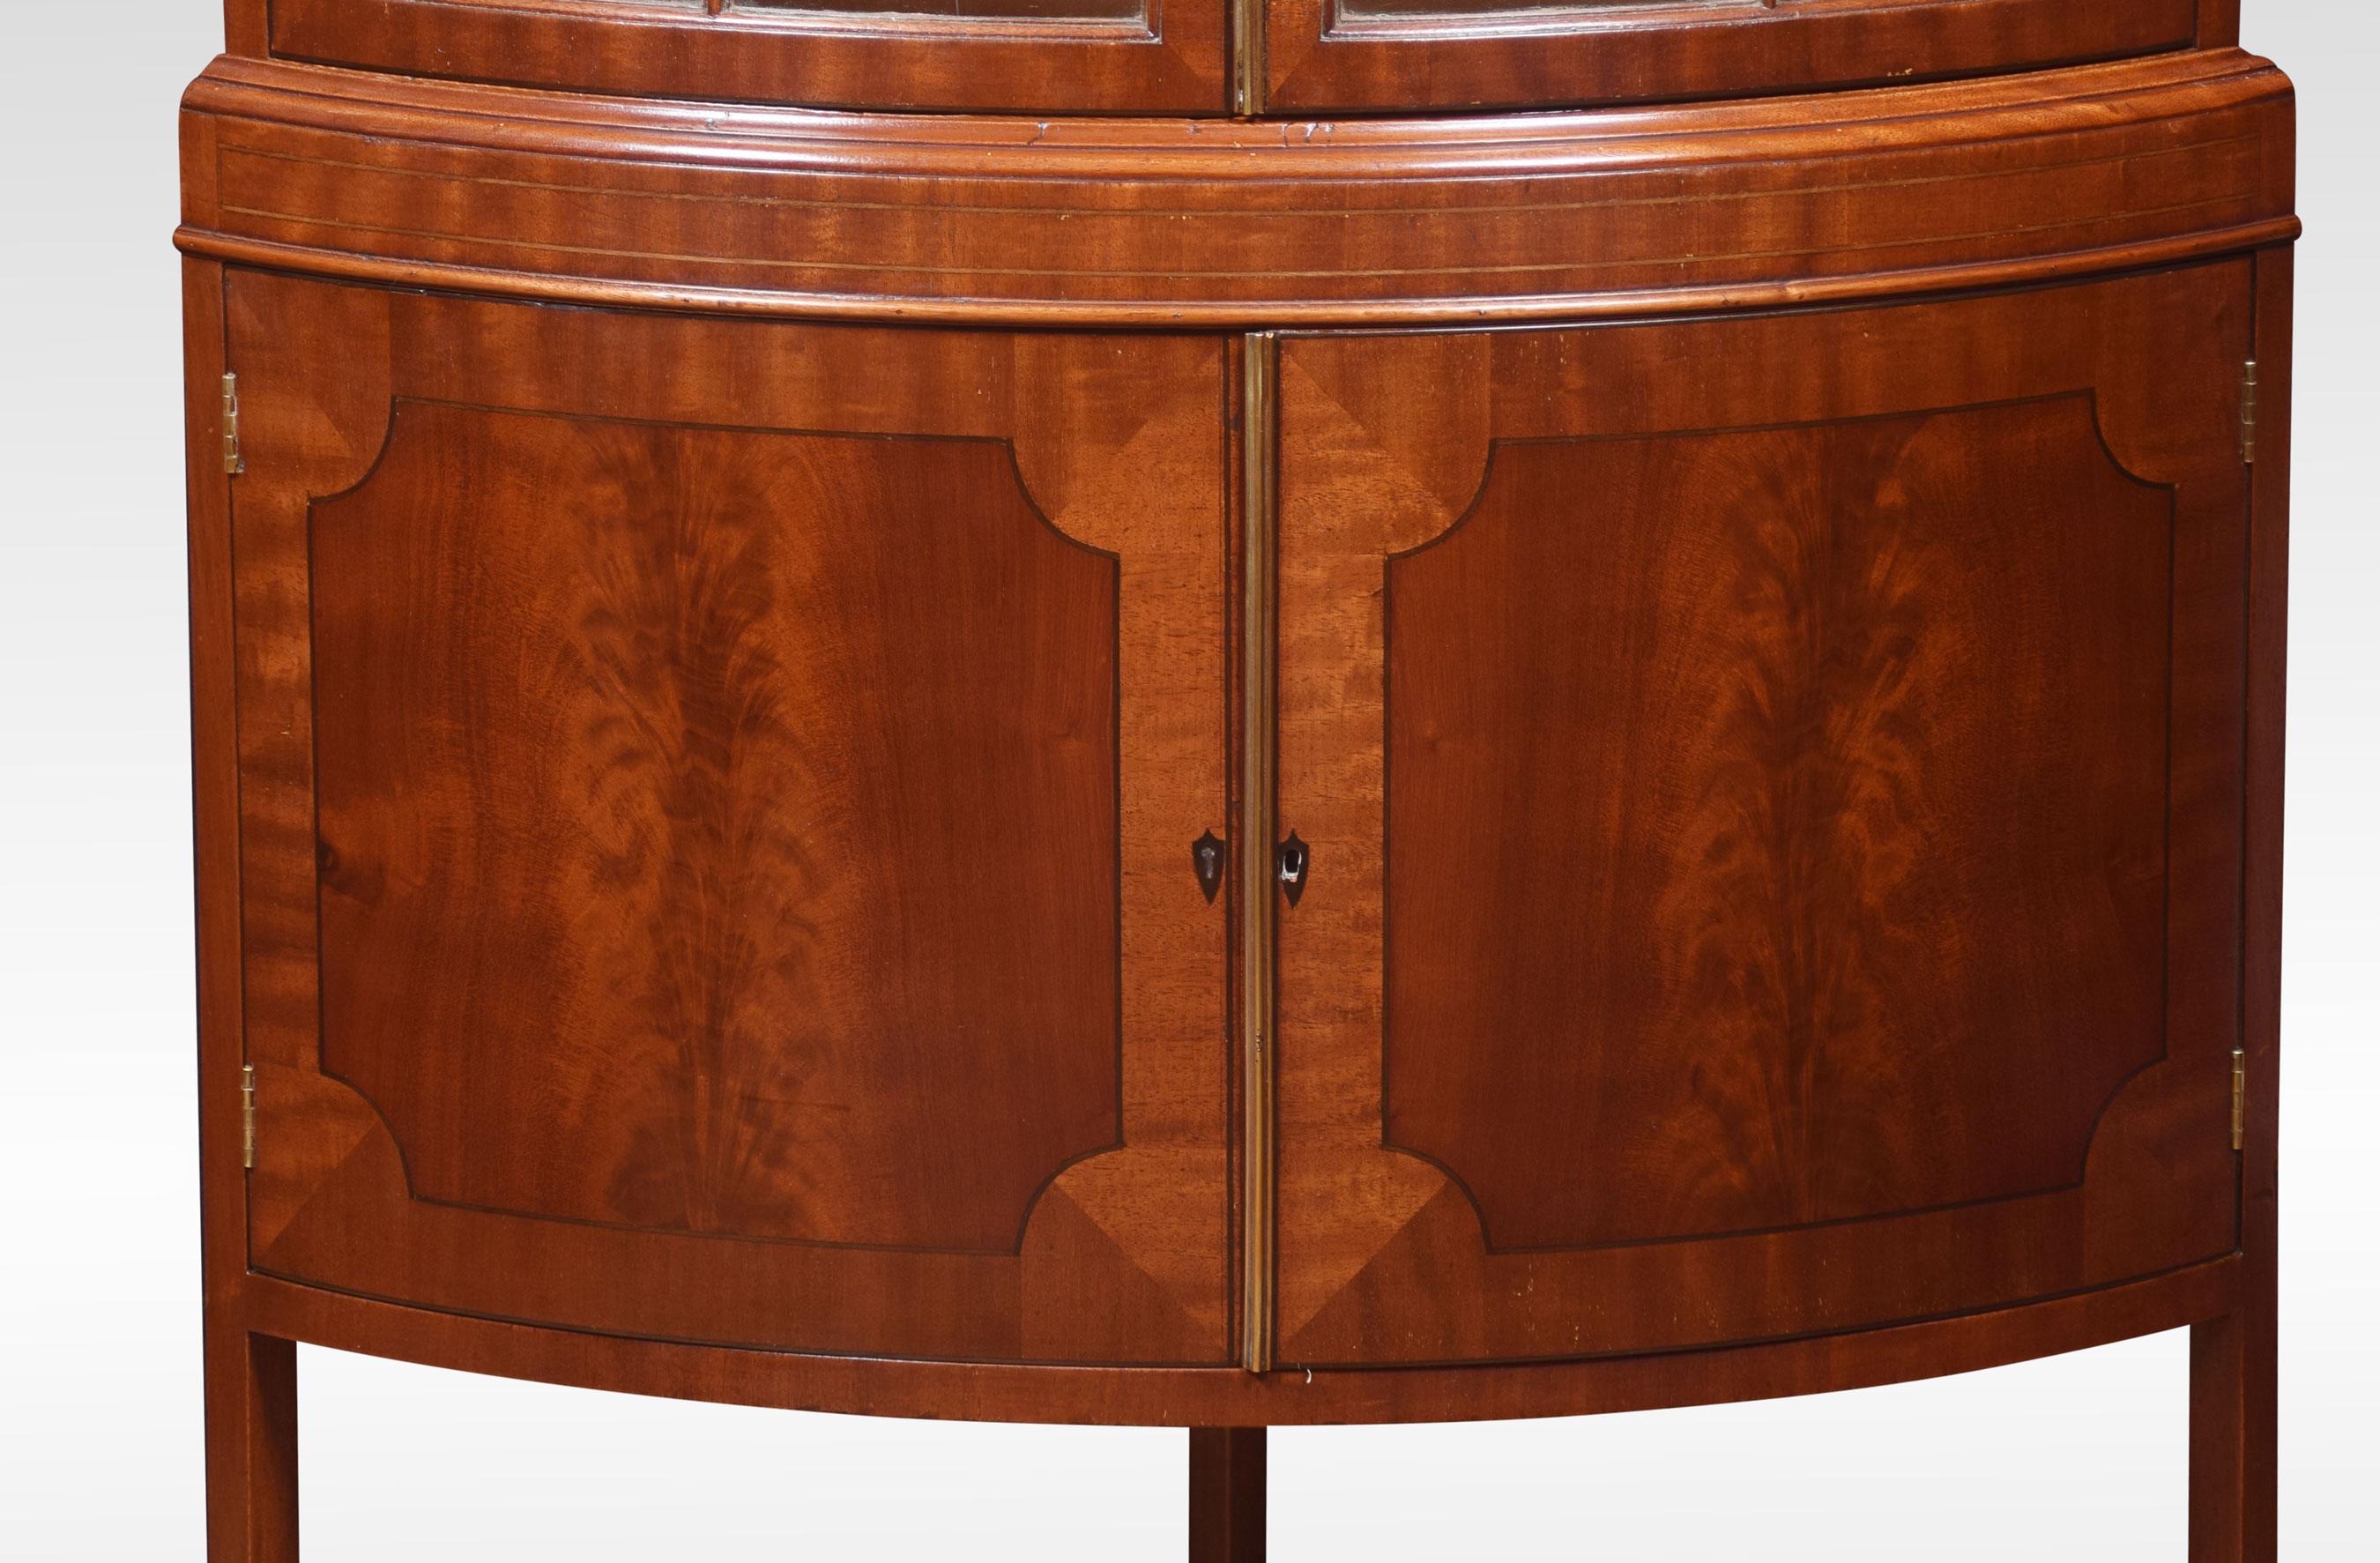 Mahogany standing corner cupboard, the bow-fronted beaded glazed door opening to reveal a shelved interior. Above a pair of mahogany paneled door opening to reveal large cupboard. All raised up on splayed legs.
Dimensions:
Height 72 inches
Width